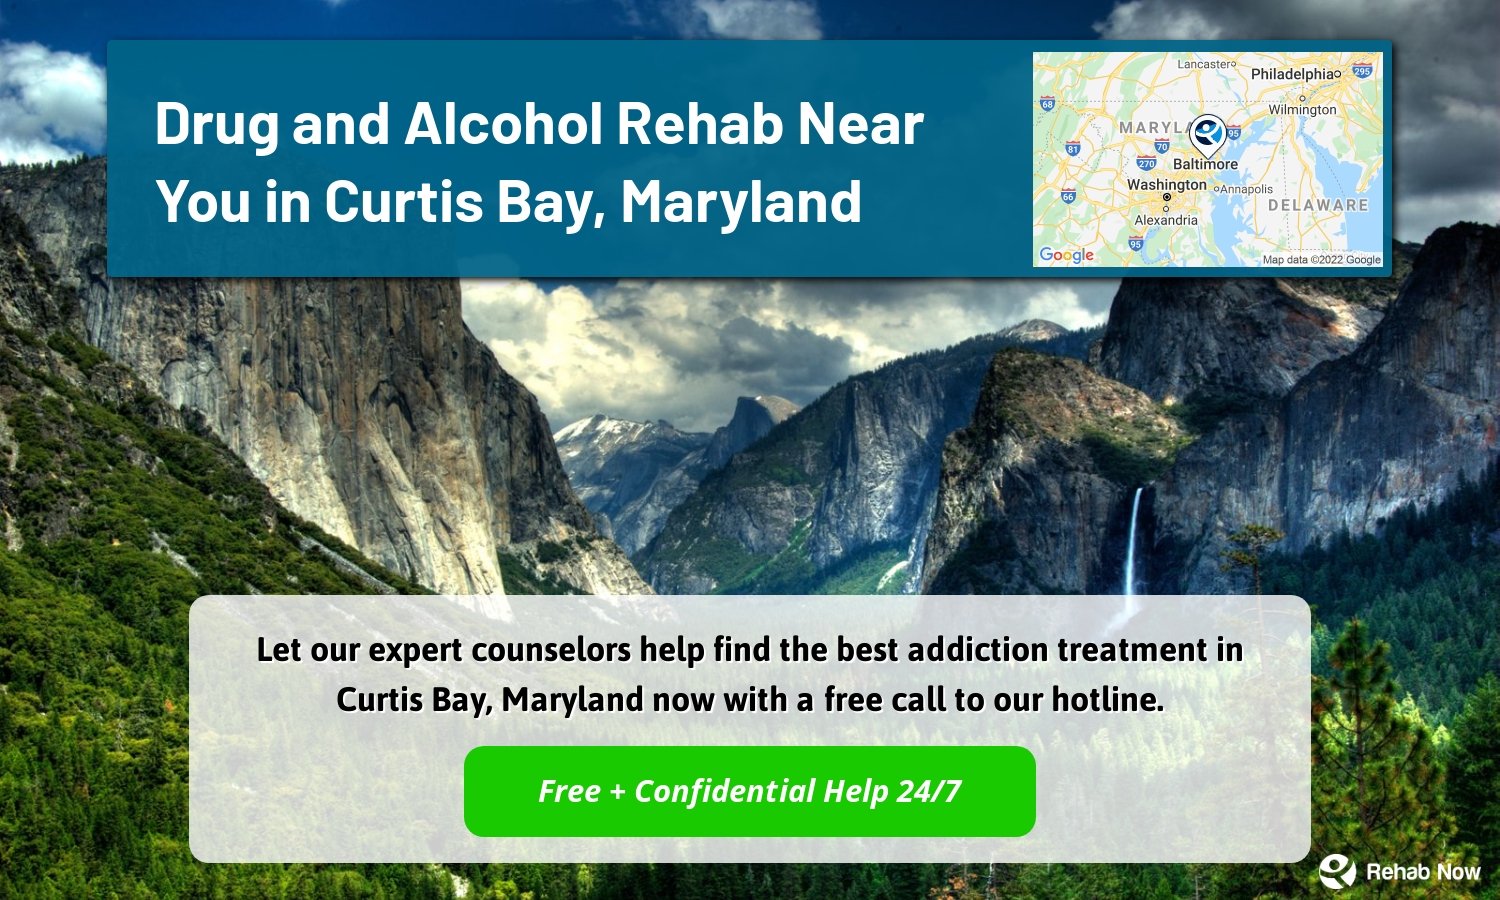 Let our expert counselors help find the best addiction treatment in Curtis Bay, Maryland now with a free call to our hotline.